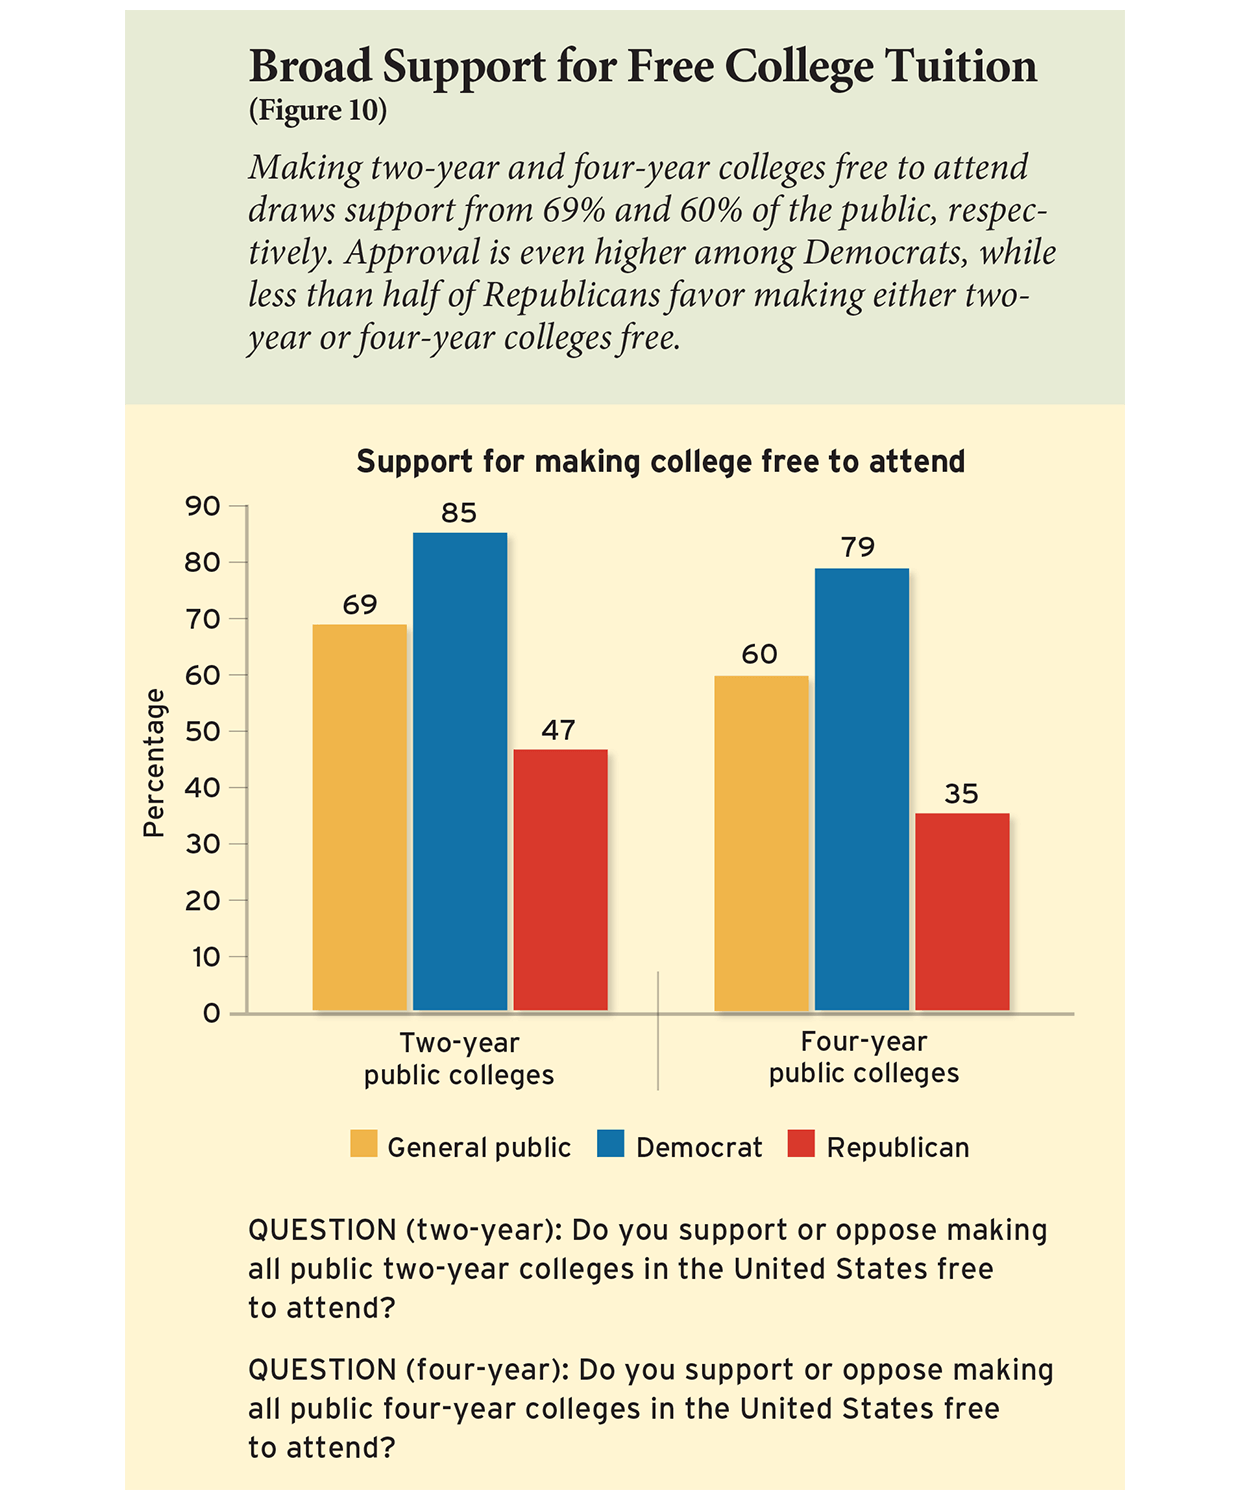 Broad Support for Free College Tuition (Figure 10)